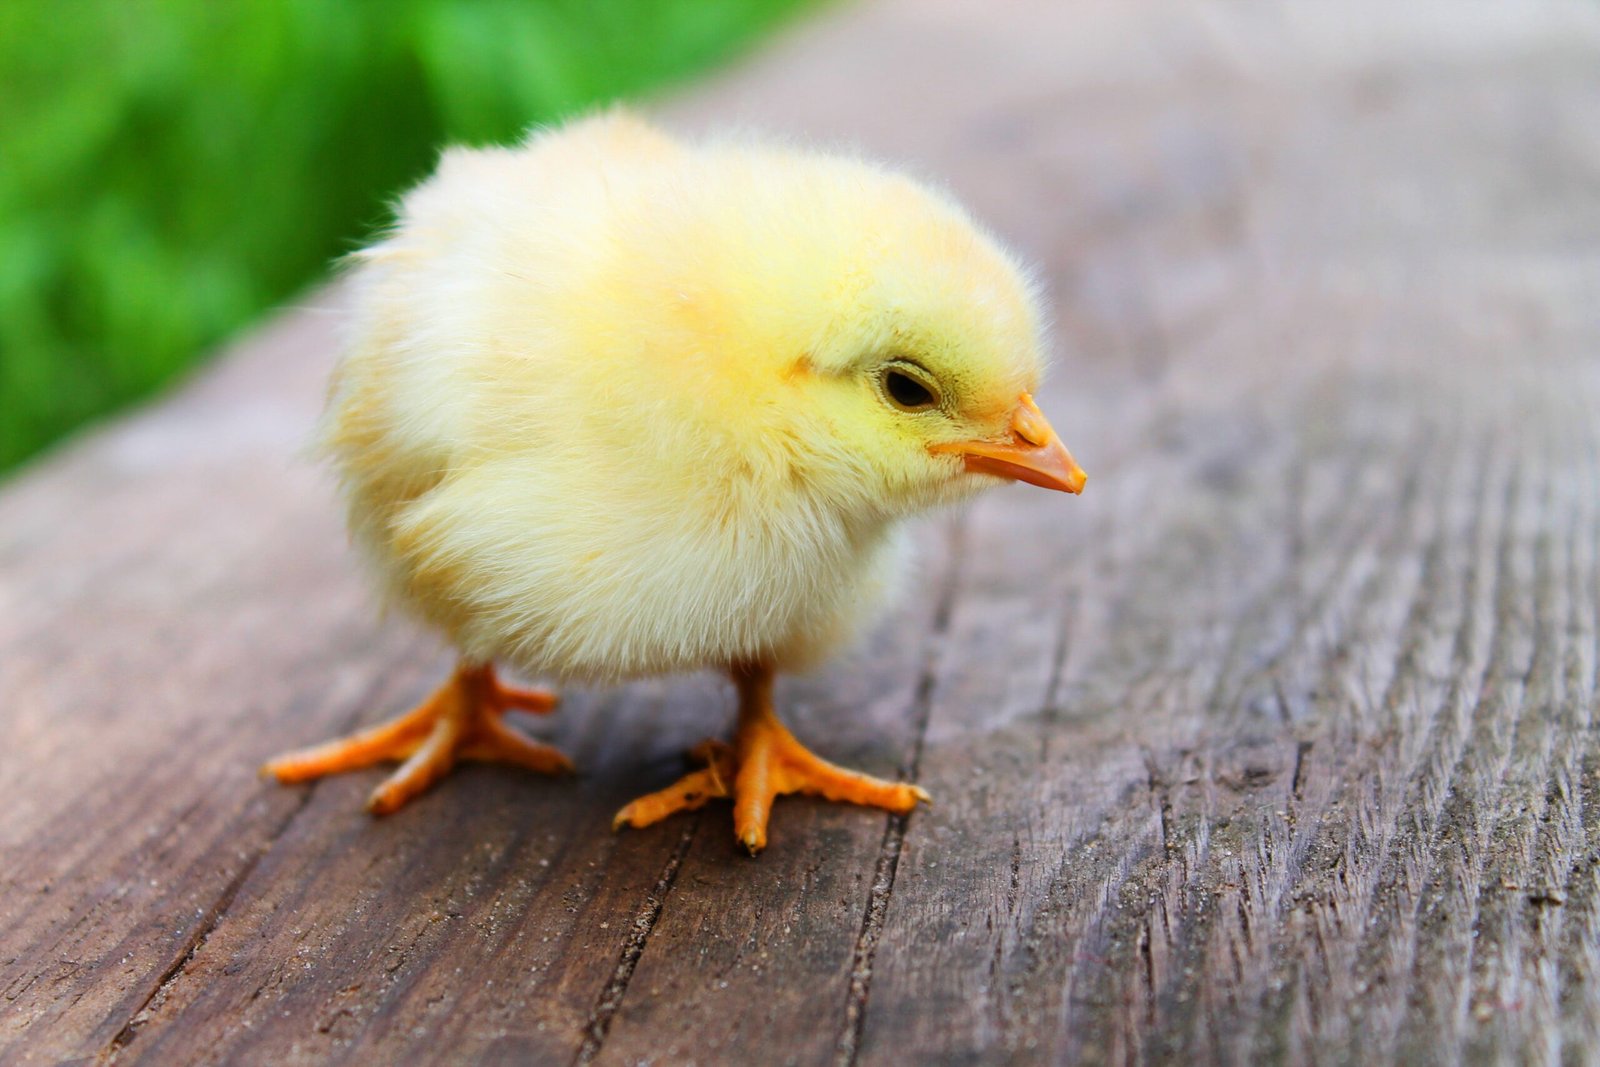 How Do You Build A Safe And Functional Brooder For Baby Chicks?